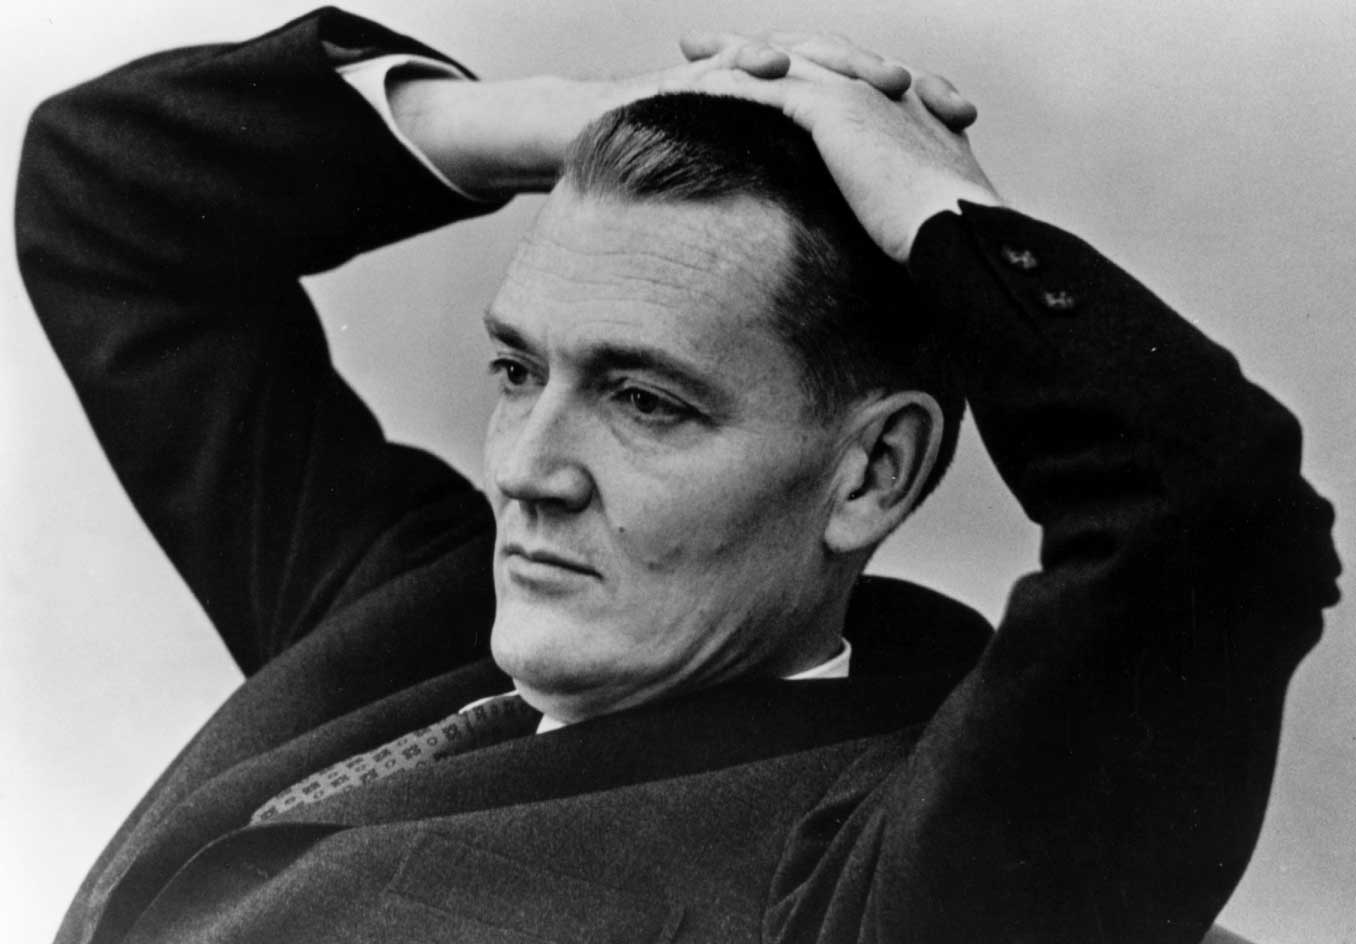 A young Jack Bogle reclines in a contemplative pose with his hands on his head. 